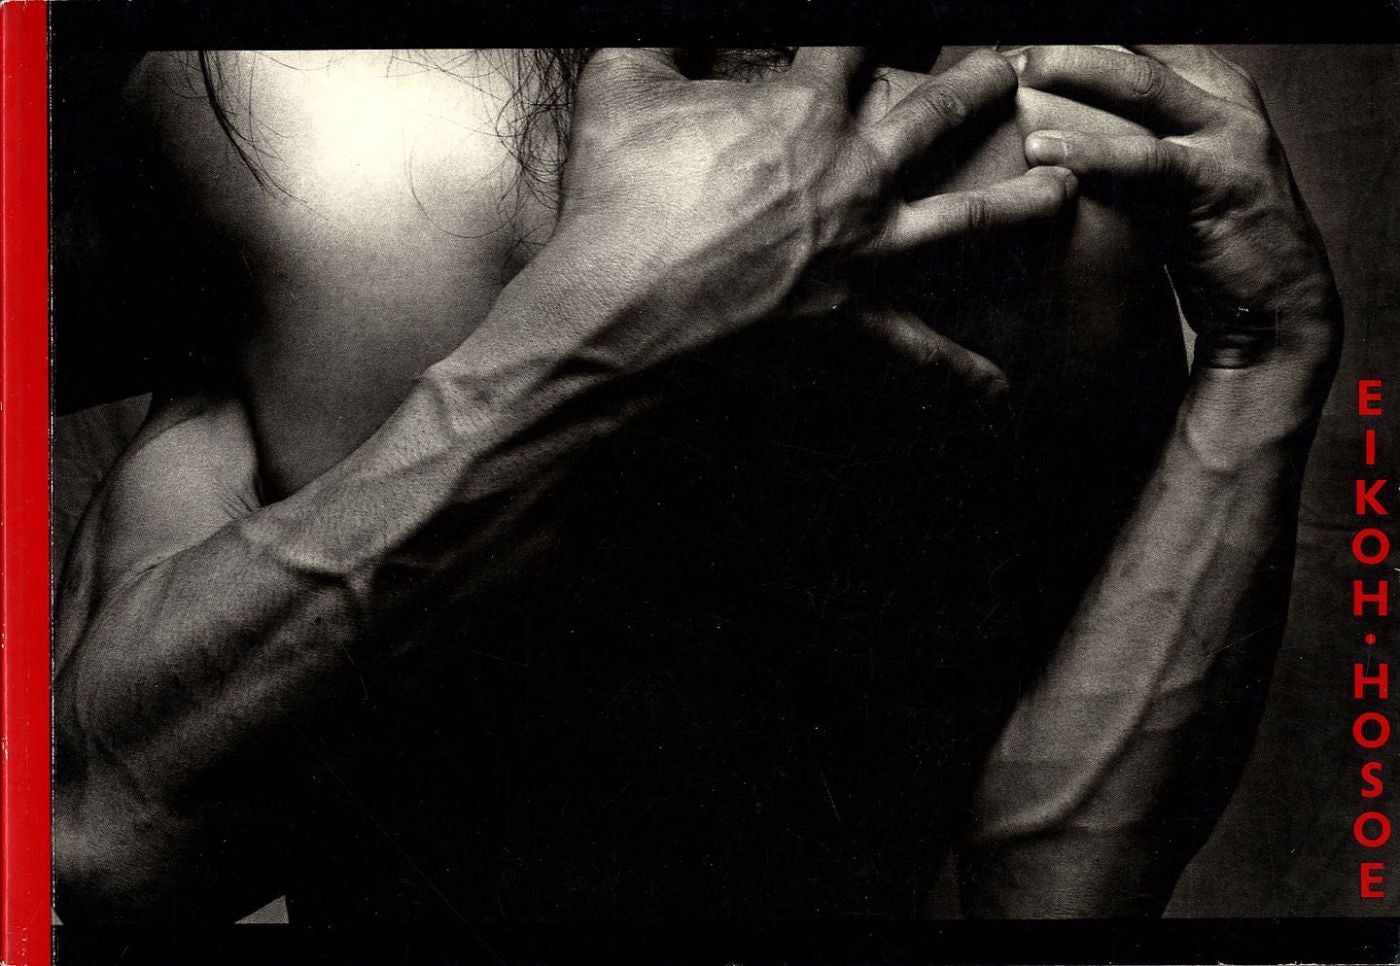 Untitled 42 (The Friends of Photography): Eikoh Hosoe